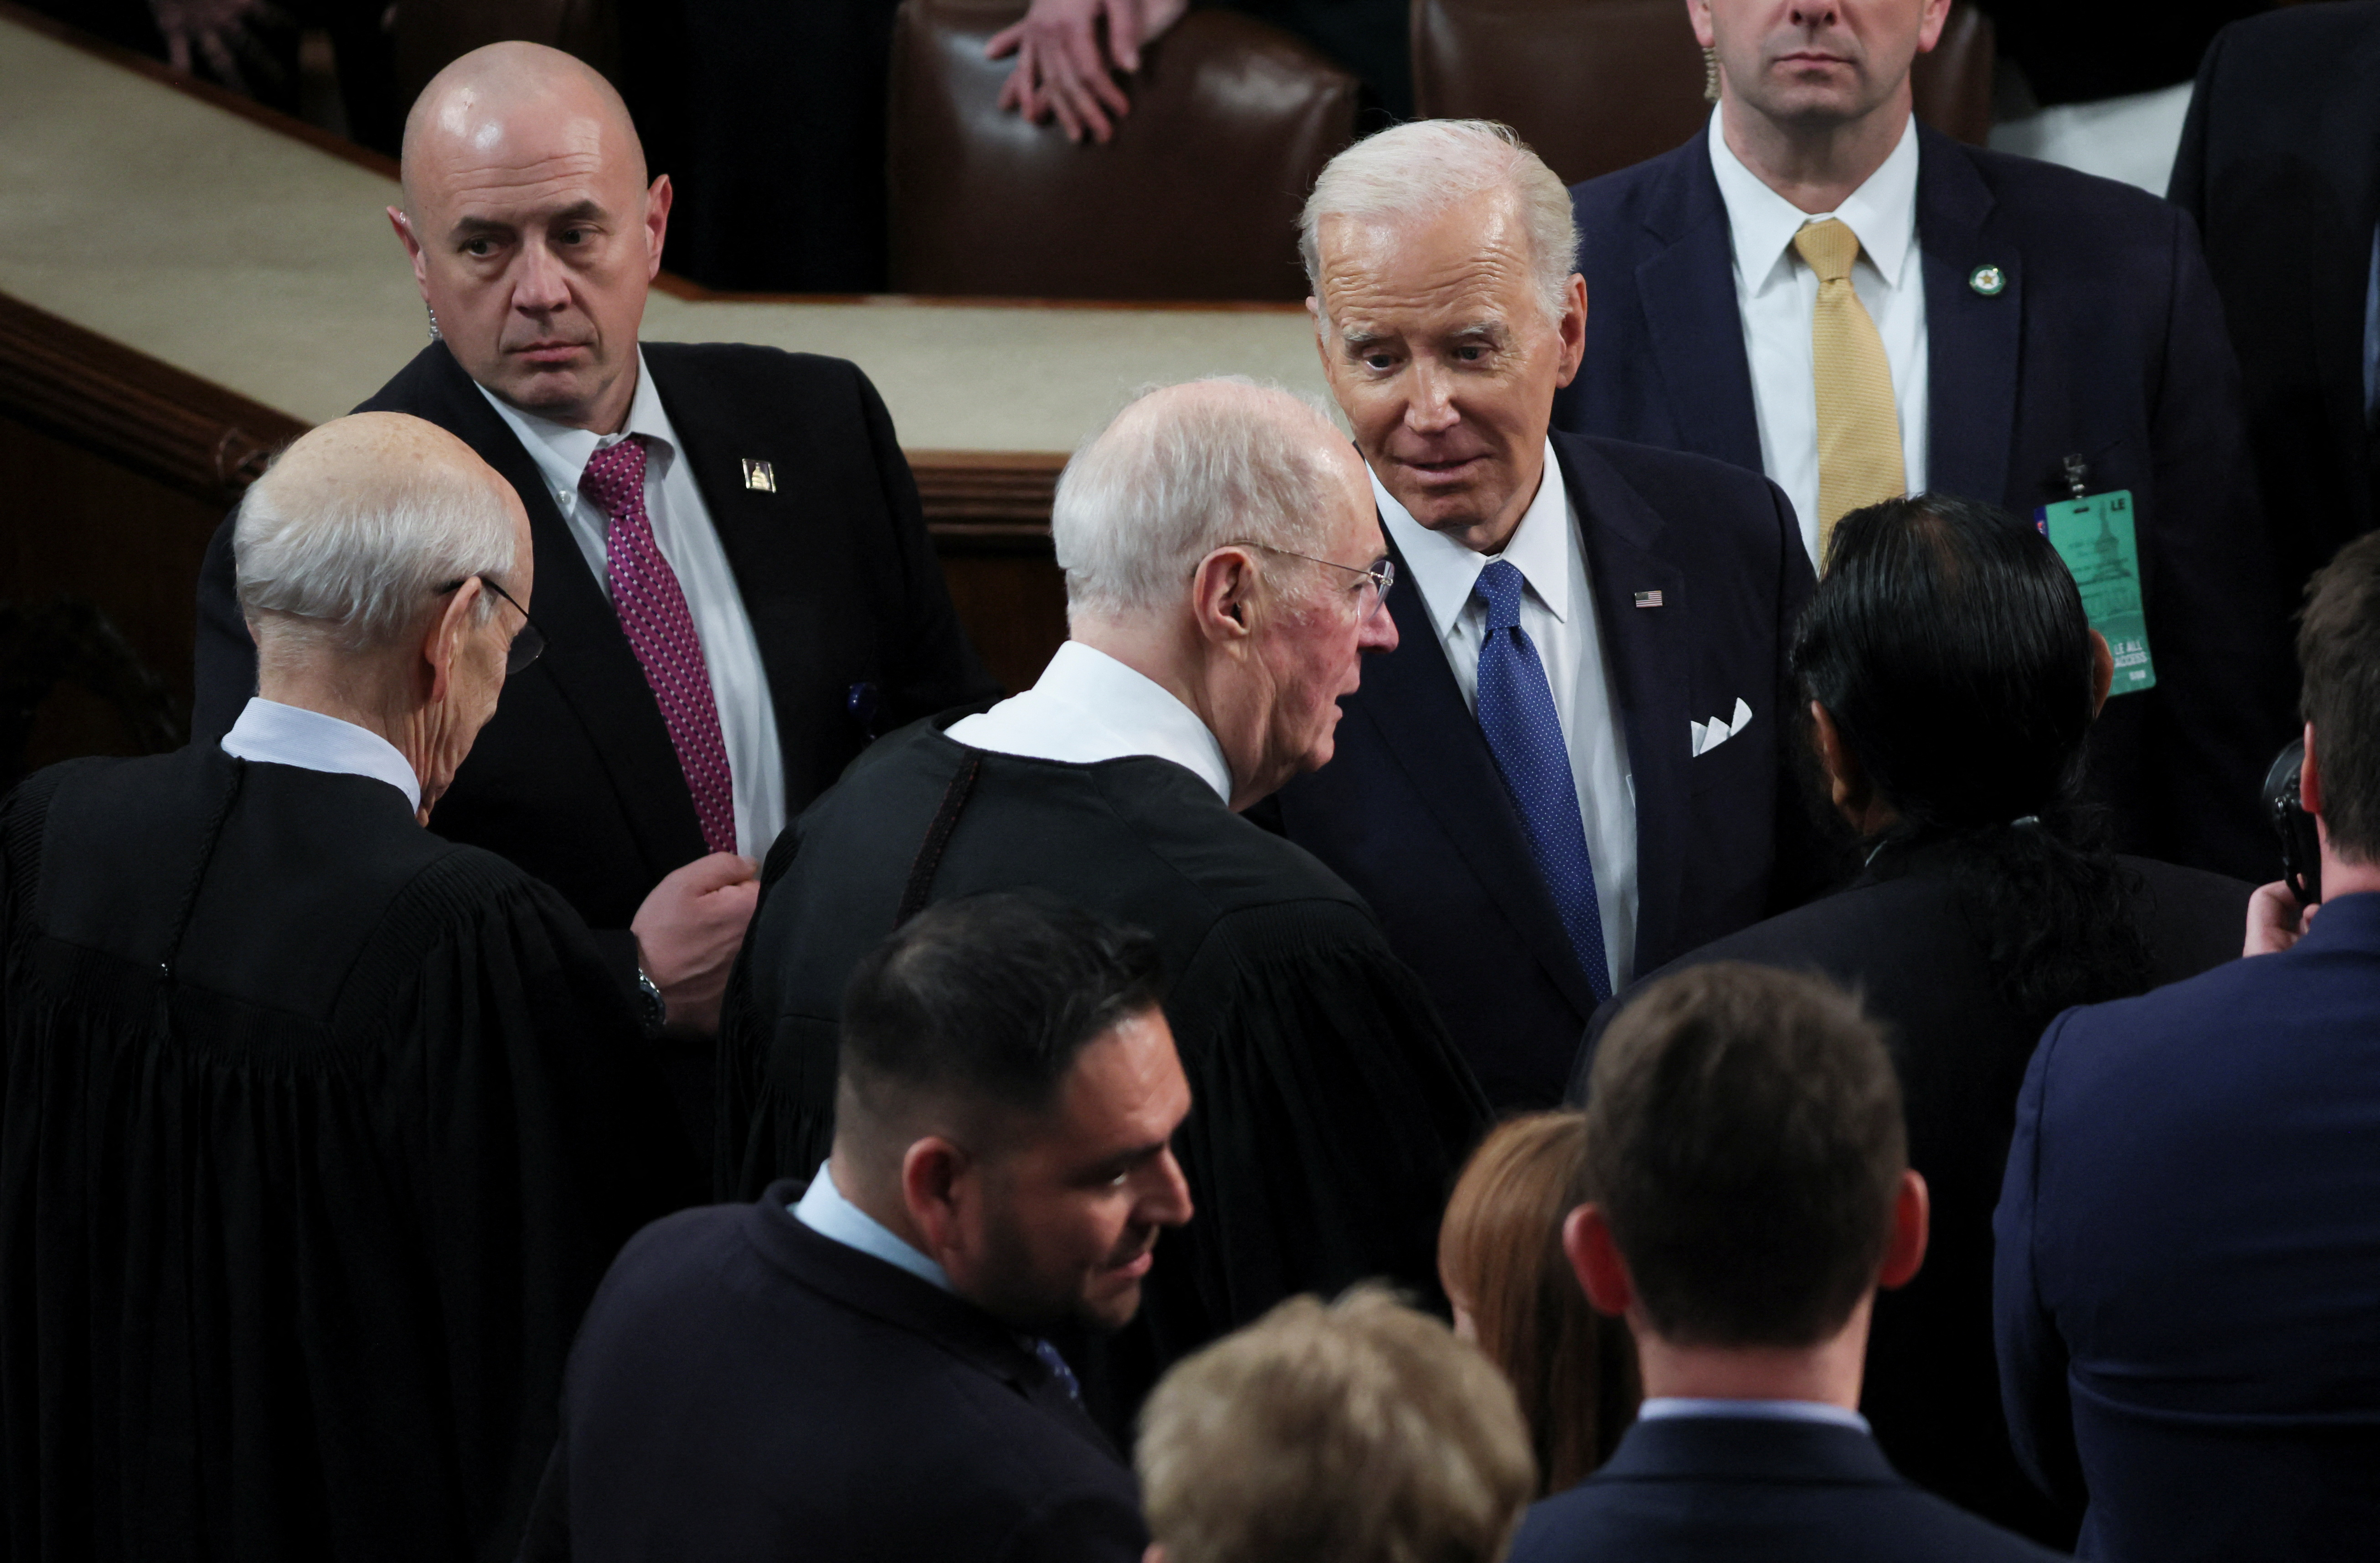 U.S. President Joe Biden delivers State of the Union address at the U.S. Capitol in Washington